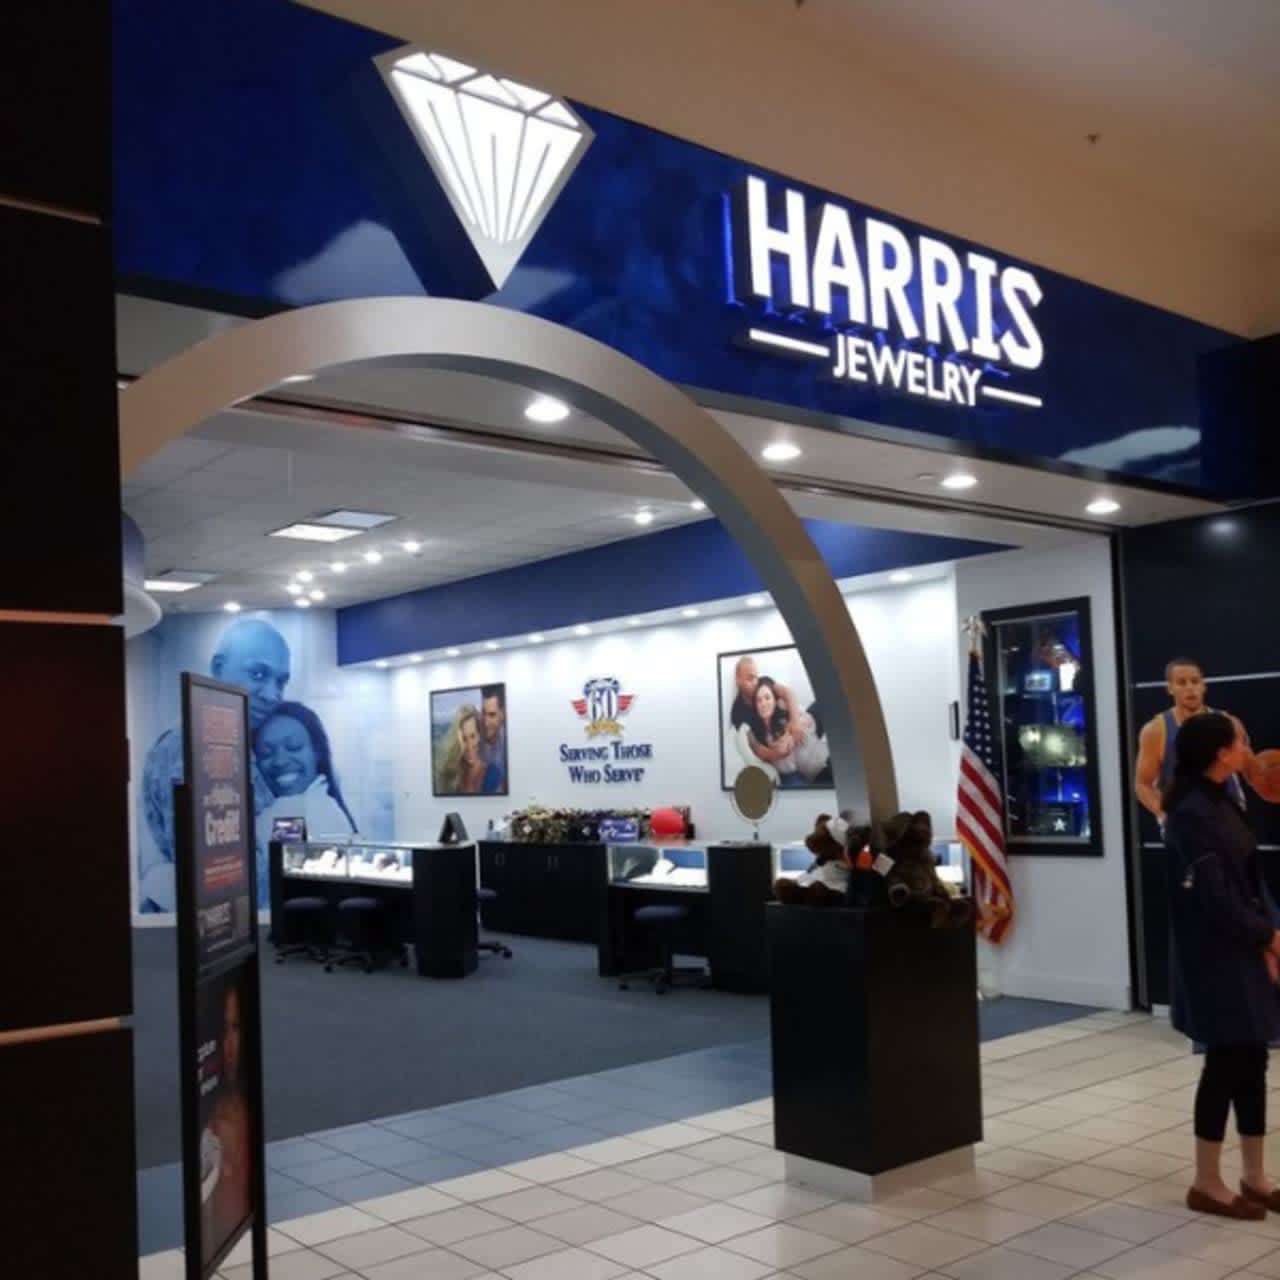 Harris Jewelry will pay $34.2 million as part of a settlement with 18 states for “deceiving and defrauding” more than 46,000 service members and veterans, according to the New York Attorney General’s Office.